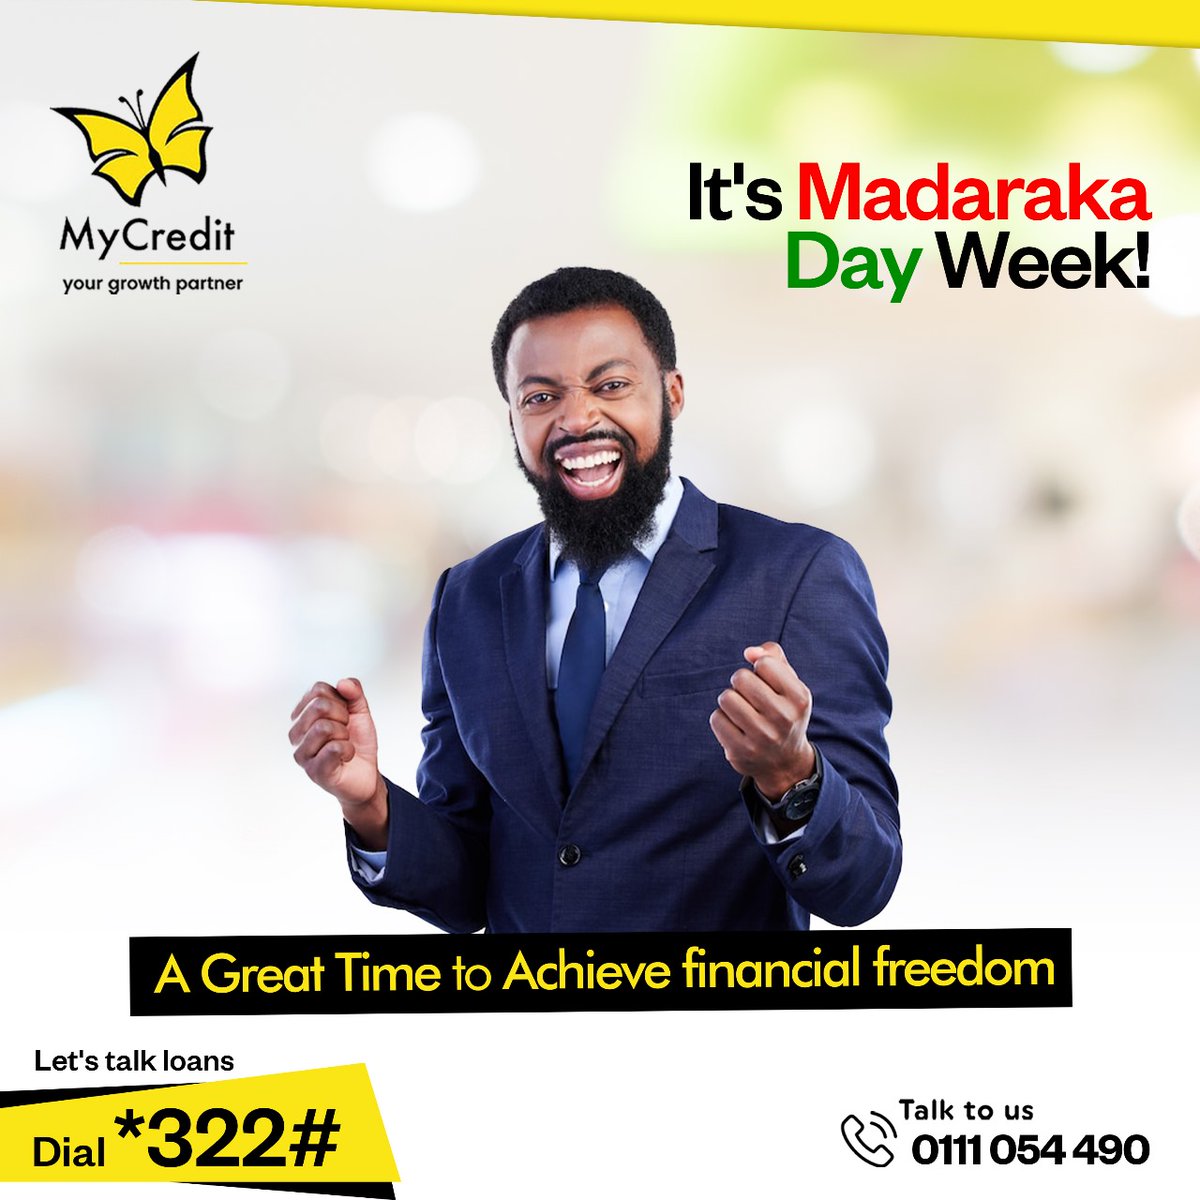 This Madarka day week, discover the secrets to financial freedom with us. #mycredit #YourGrowthPartner